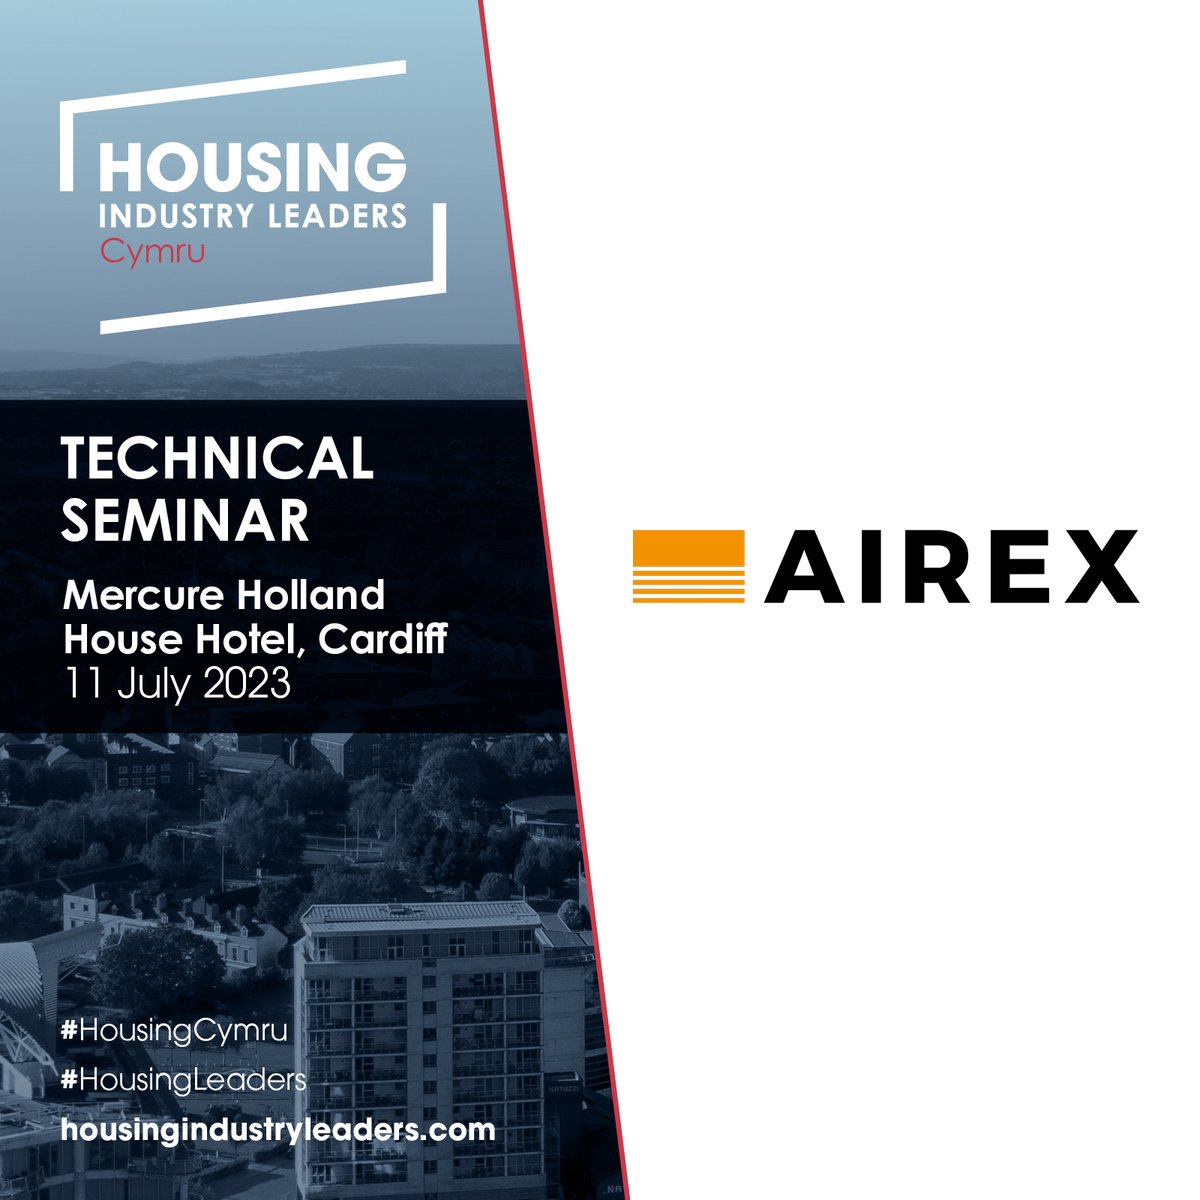 🎉 We are delighted to announce that AirEx will be presenting a Technical Seminar at Housing Industry Leaders Cymru. 

Join AirEx at the Mercure Holland House Hotel, Cardiff, on 11 July 2023 ➡️ ow.ly/Ianw50NB7WK

#HousingLeaders #Housing #WelshHousing #AirEx #Cardiff